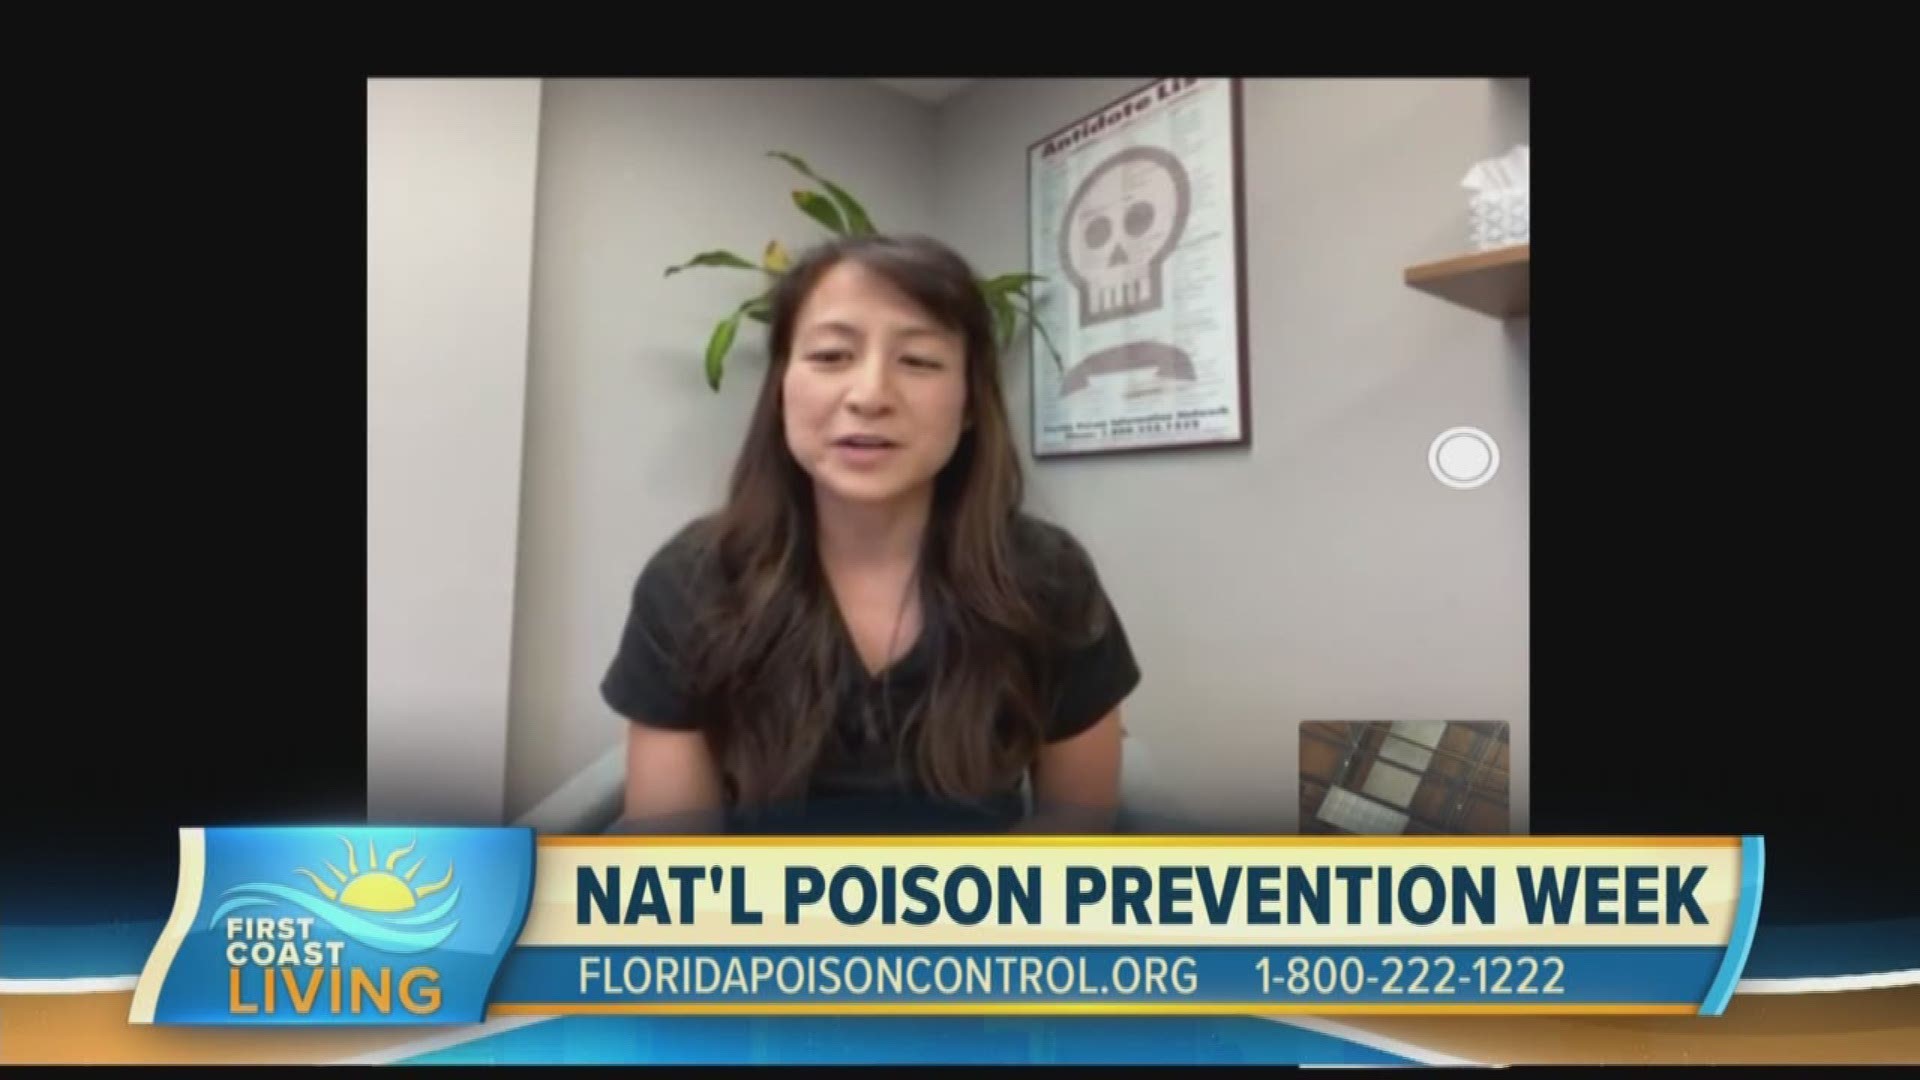 Learn more about poison control and poison prevention to protect you and your family.